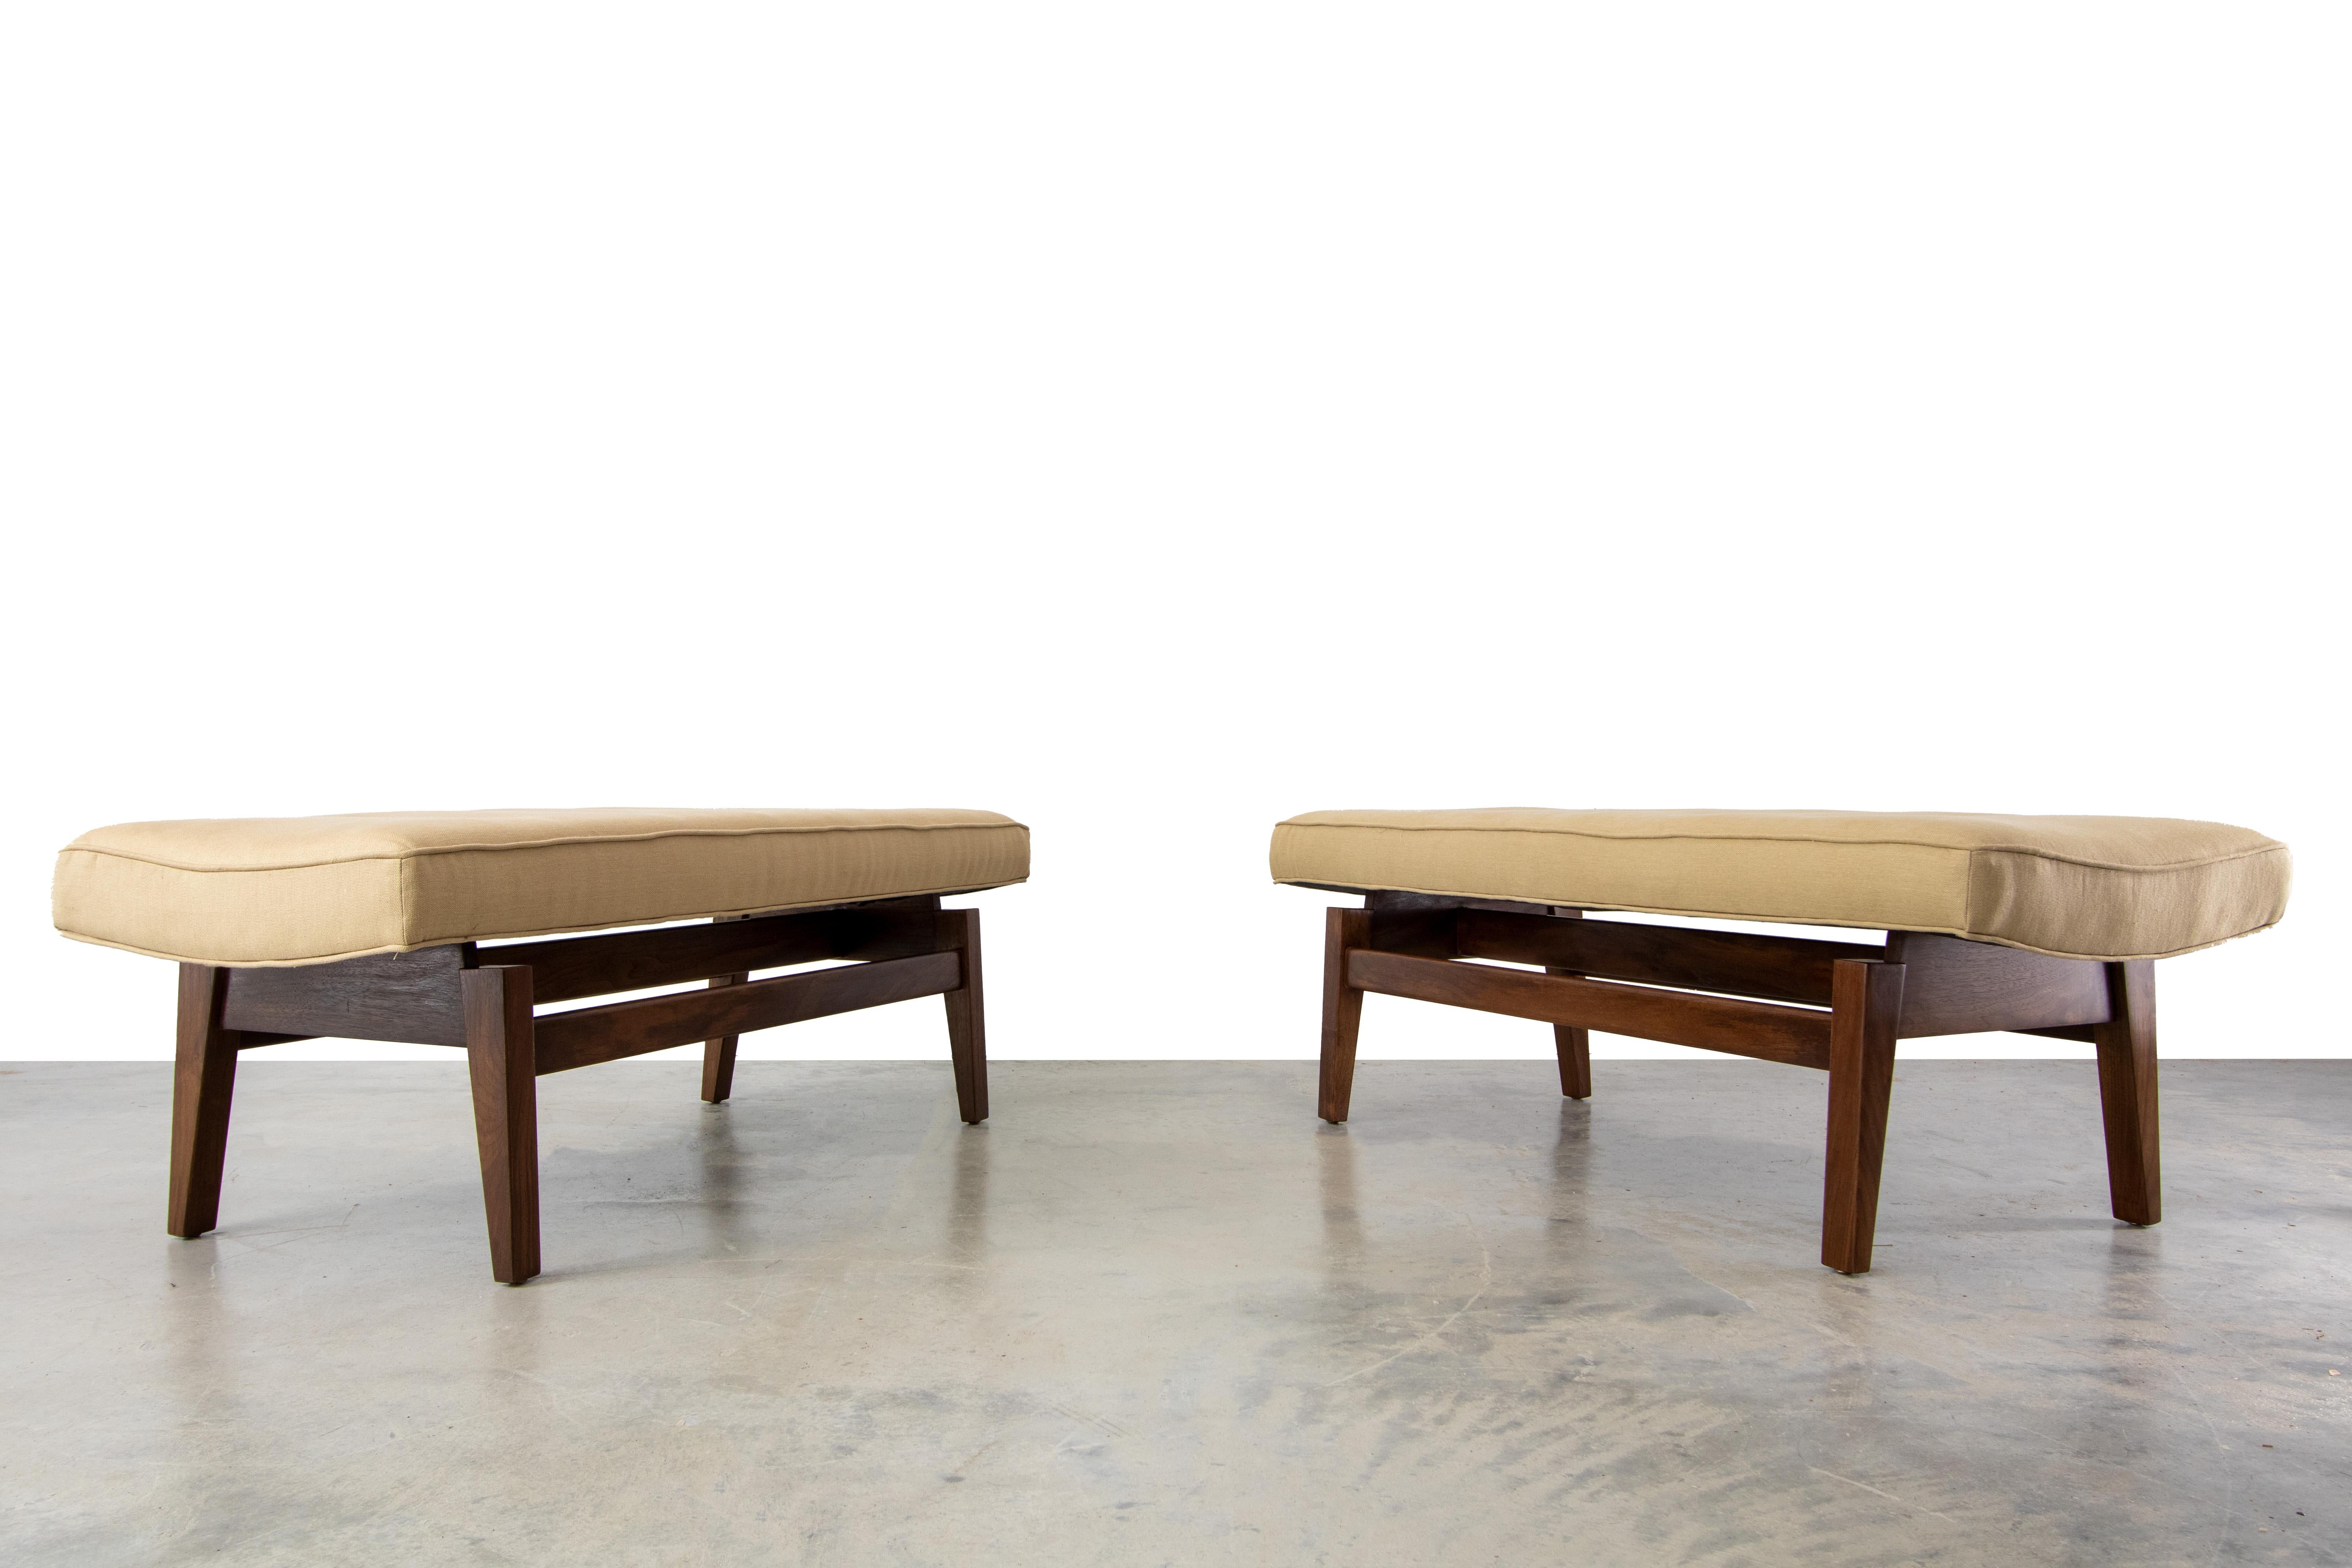 American Pair of Jens Risom Floating Mid-Century Modern in Walnut and Linen